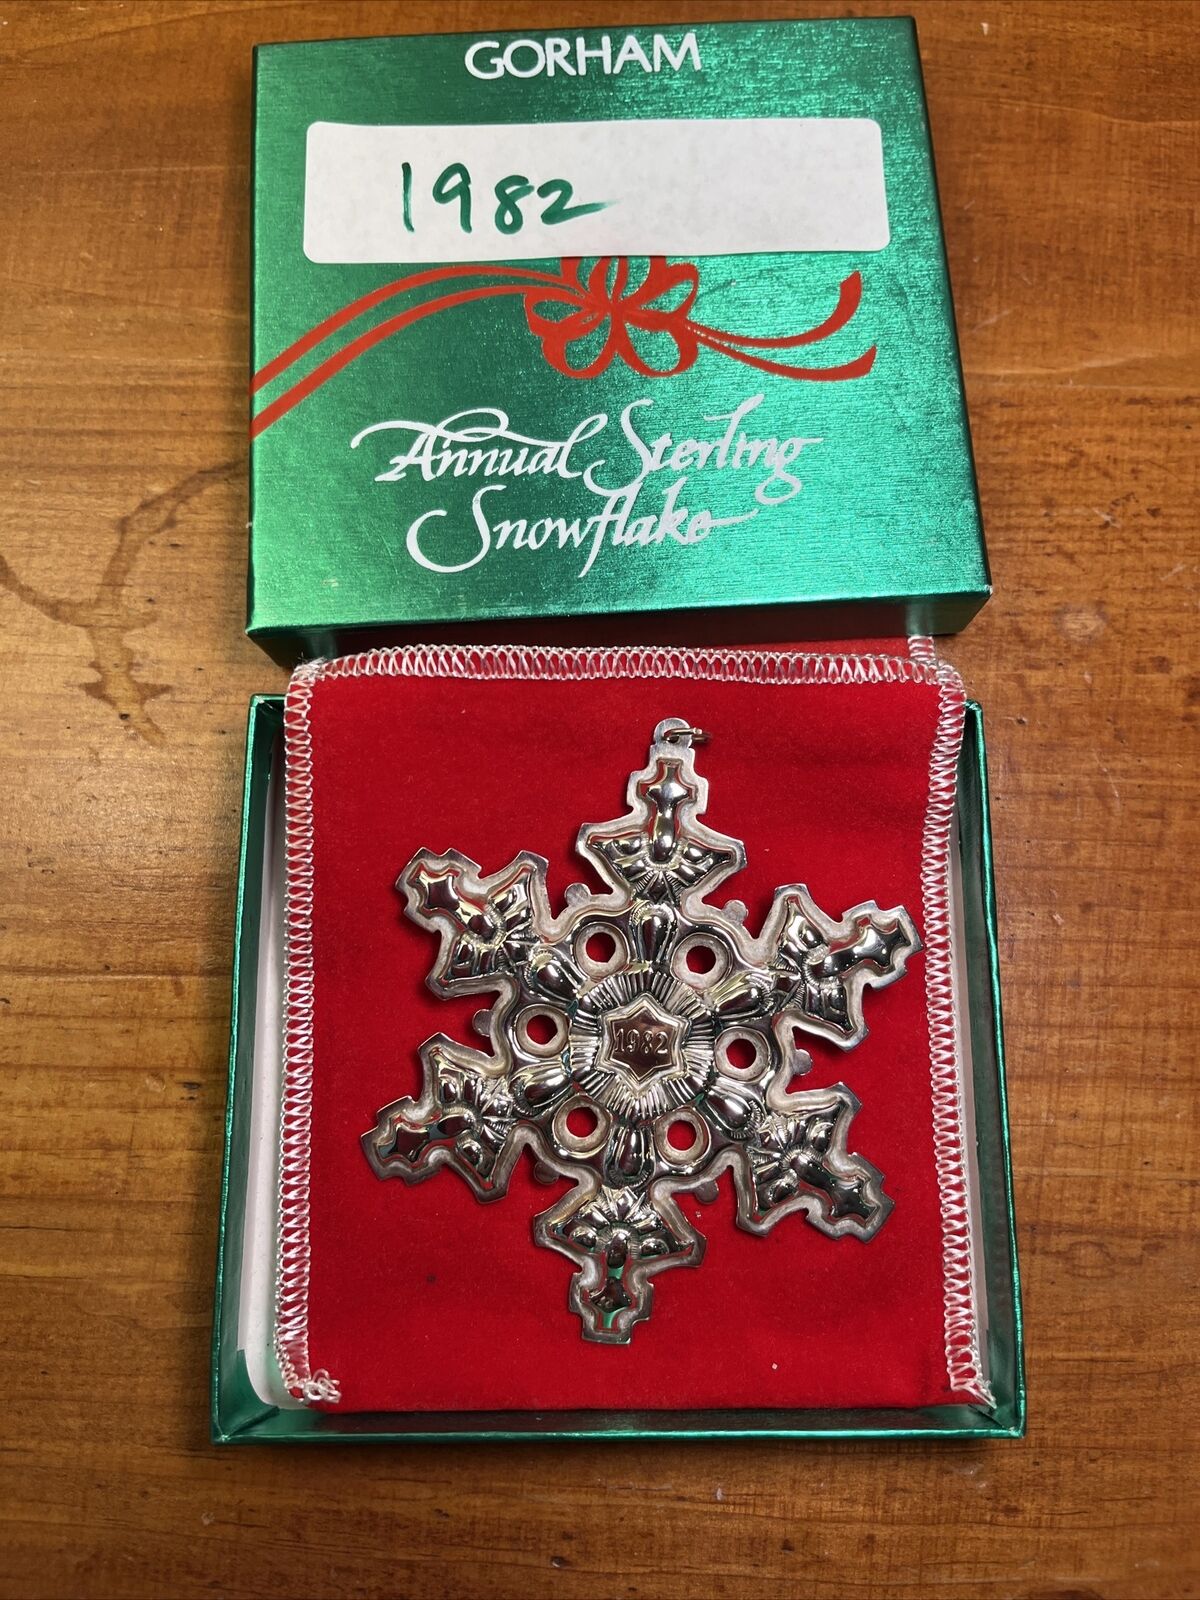 Sterling Silver Gorham Archive Collection 1982 Christmas Ornament Xmas Snowflake